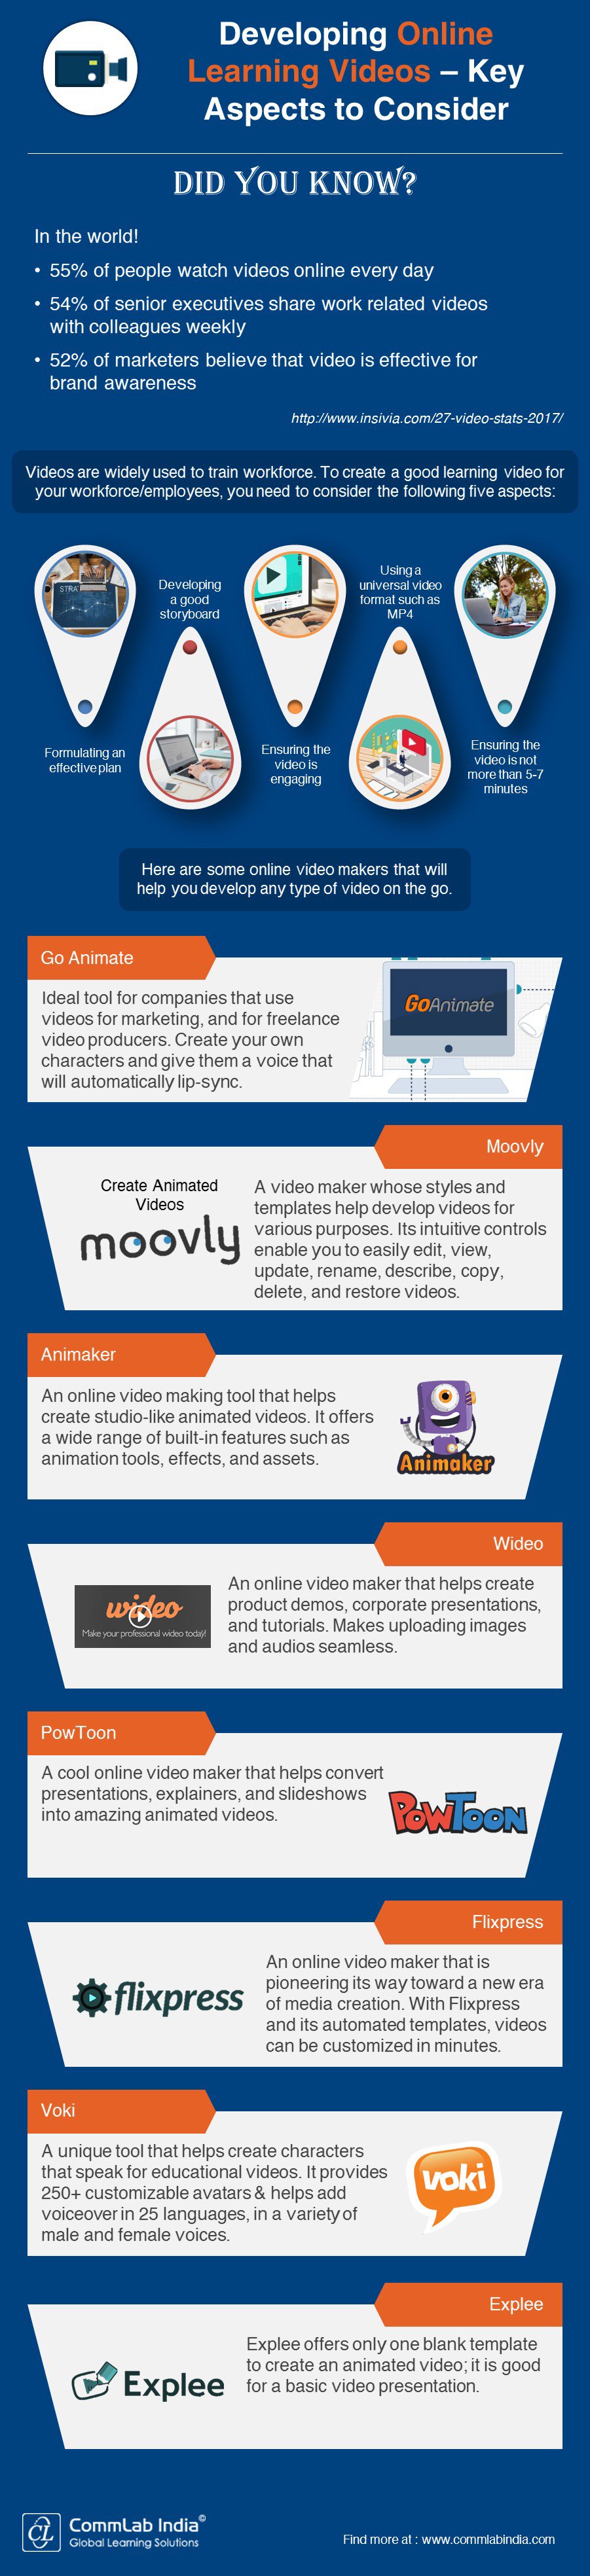 Developing Online Learning Videos – Key Aspects to Consider [Infographic]